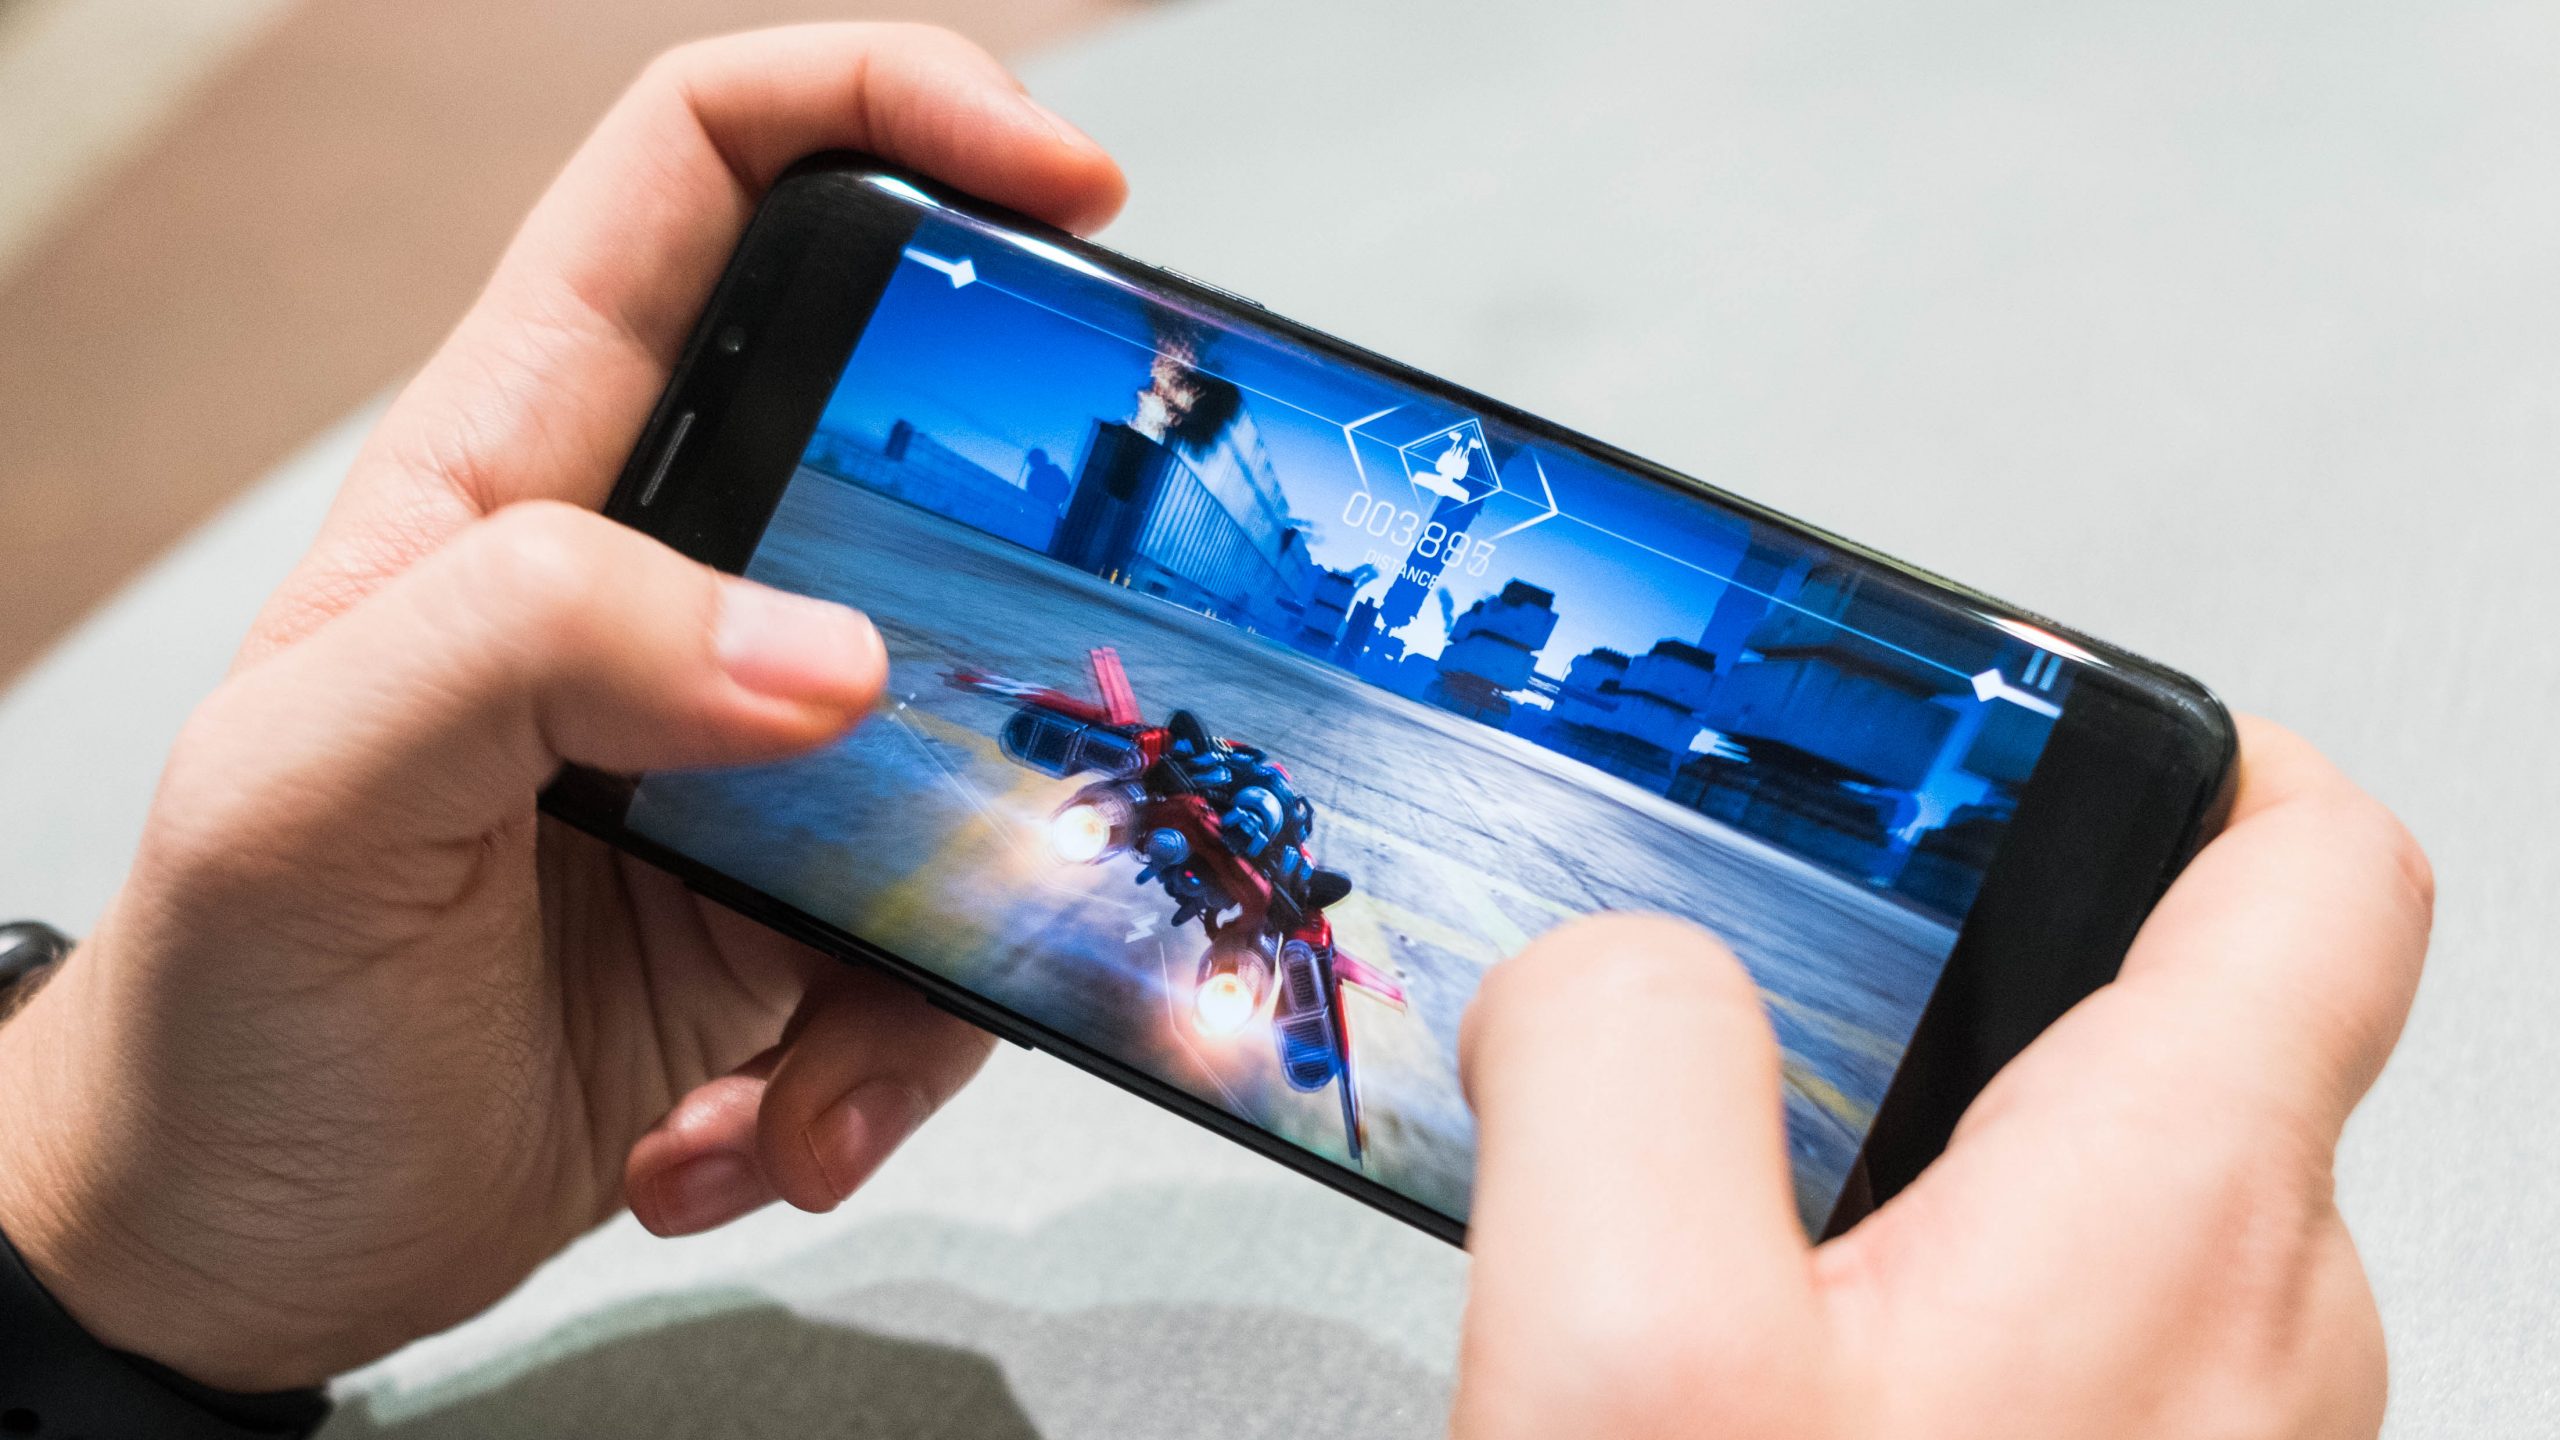 Smart Game Phone Market Insights and Global Outlook 2019-2025 : Razer, Asus, Xiaomi, ZTE, Huawei